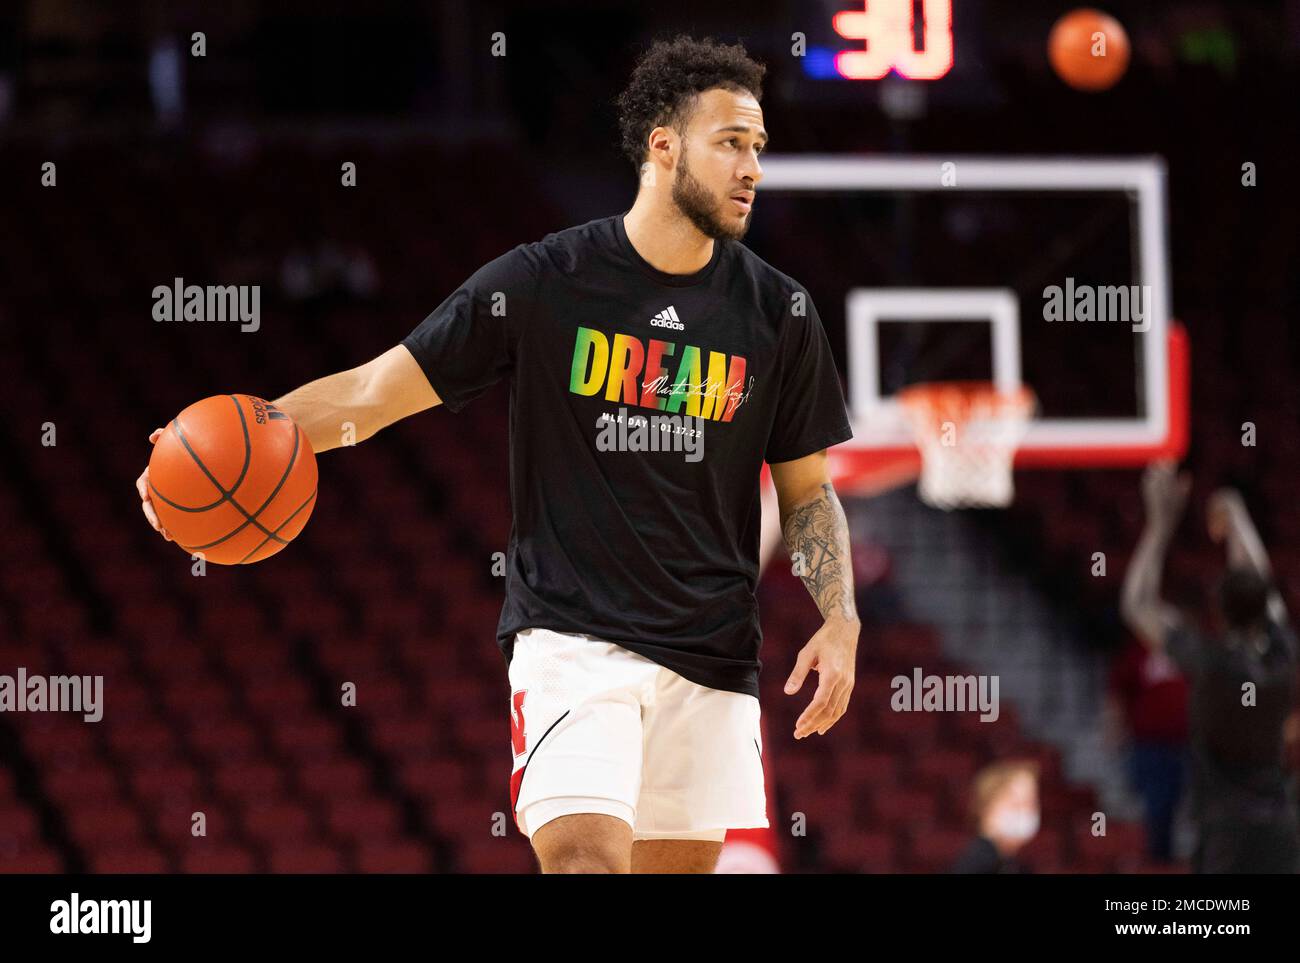 See the shirts NBA players are wearing to honor Martin Luther King Jr.